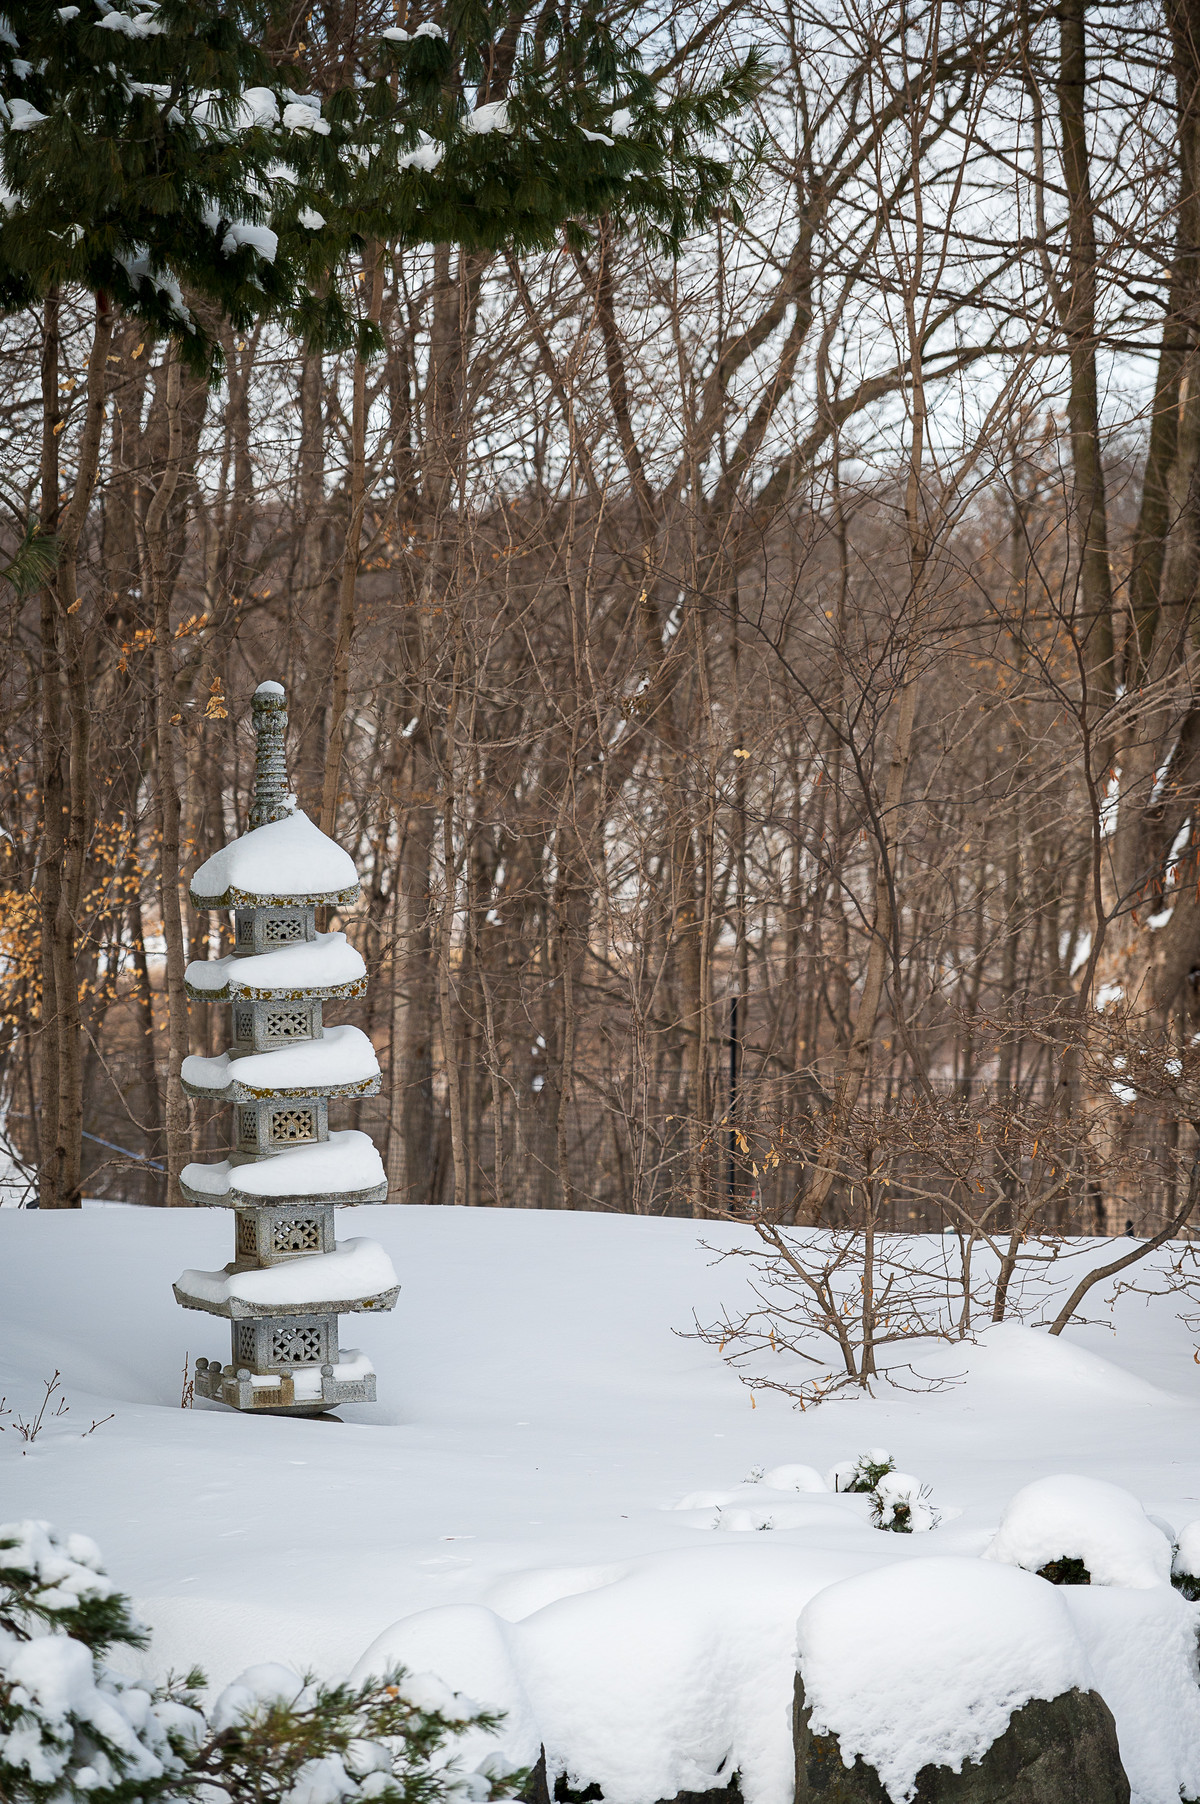 Pagoda stone tower in snow